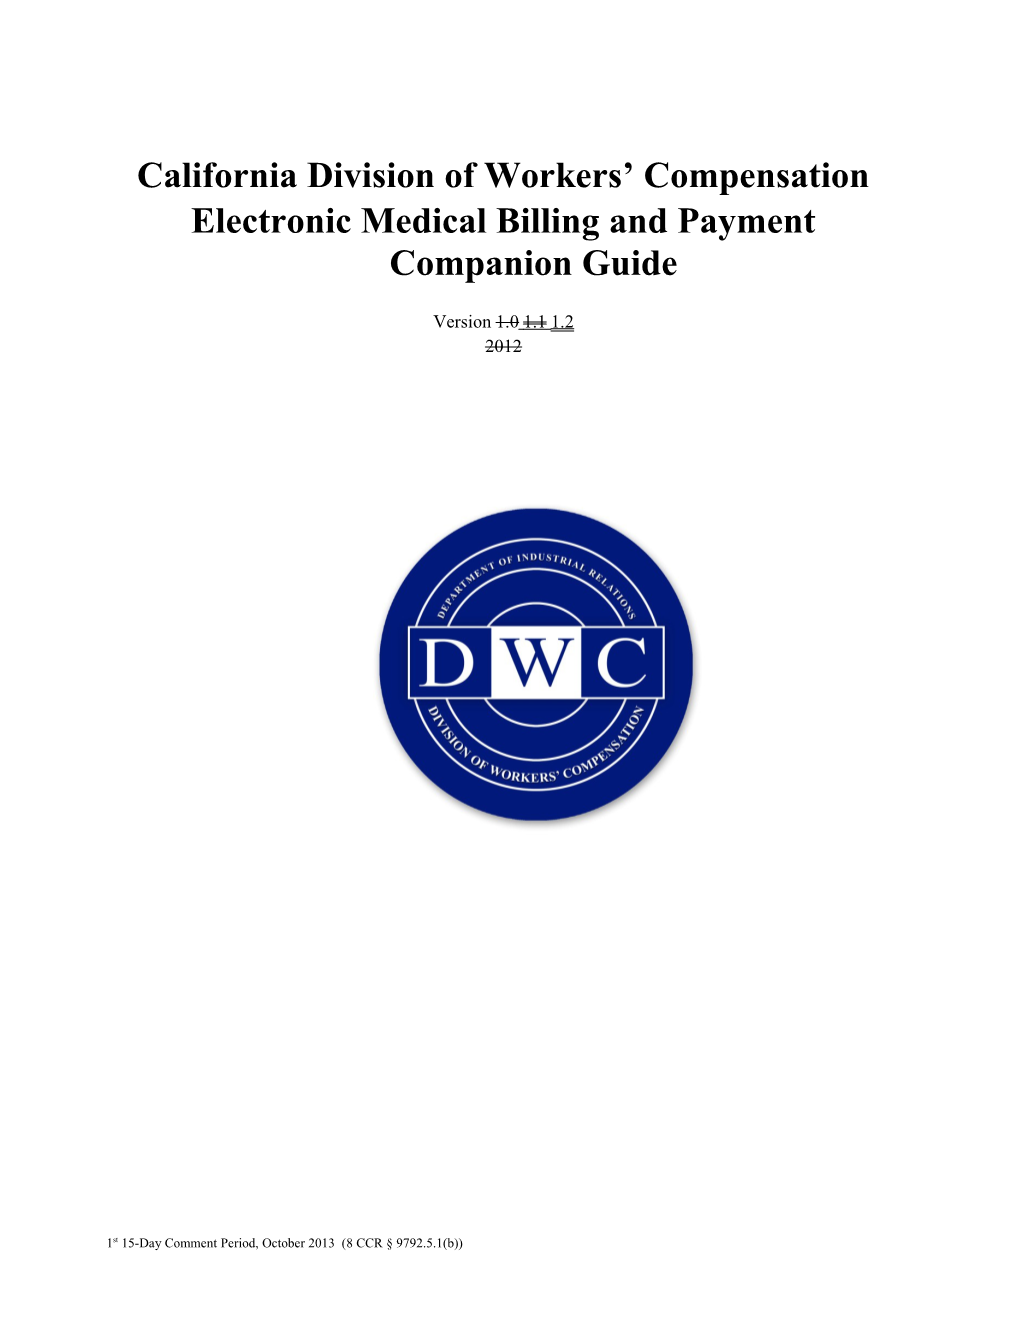 California Electronic Medical Billing and Payment Companion Guide s1